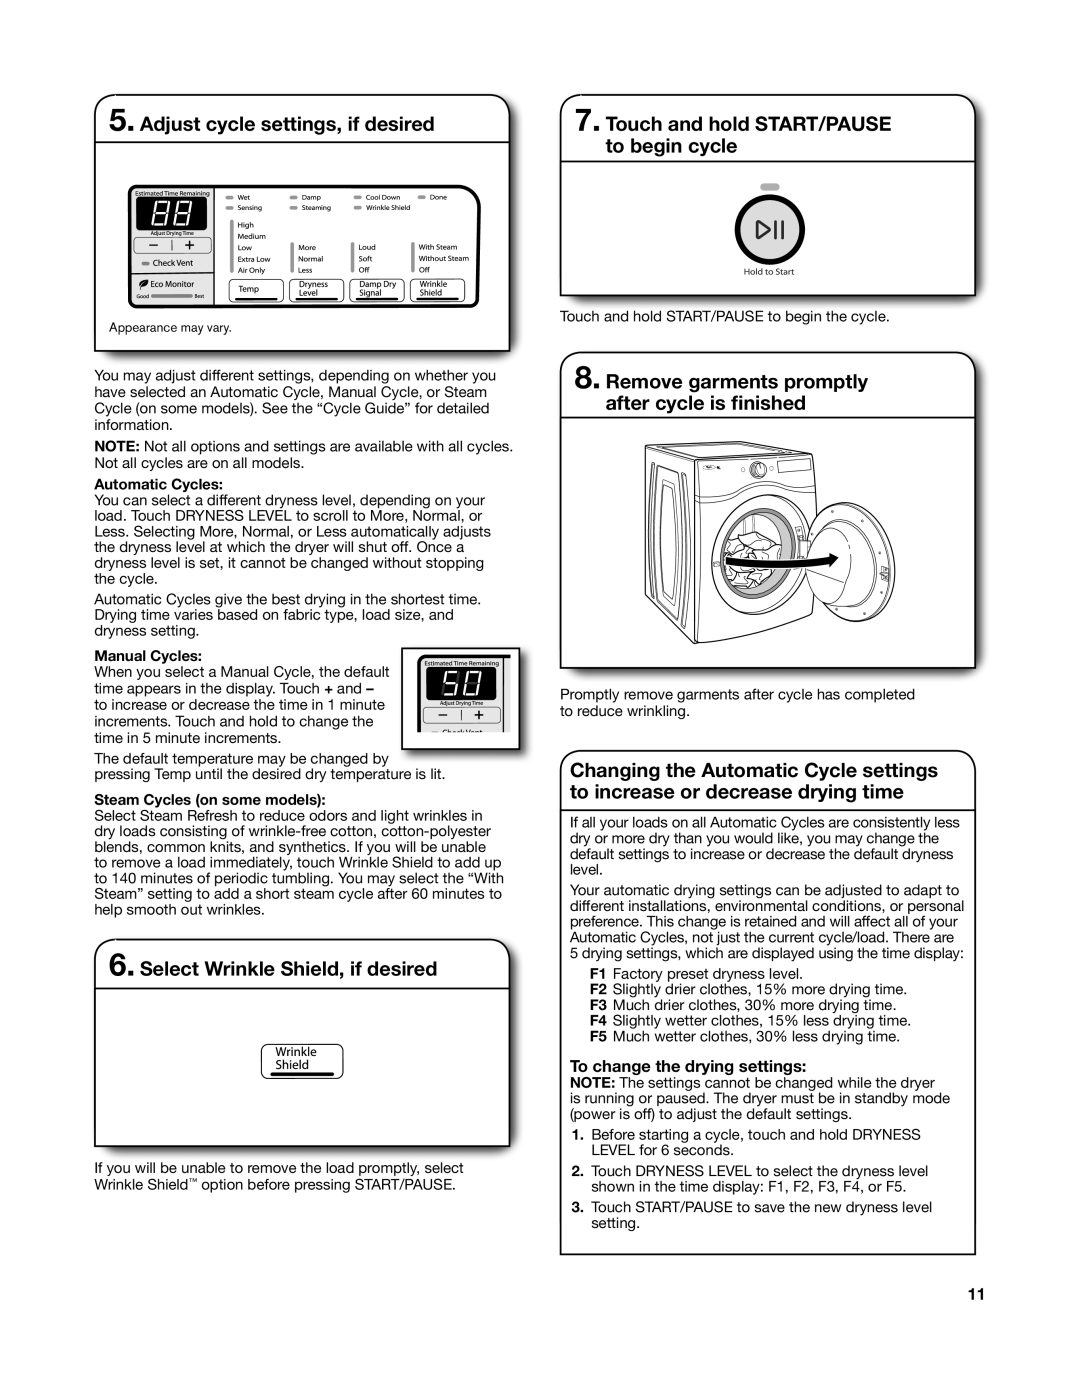 Whirlpool W10529641A Adjust cycle settings, if desired, Select Wrinkle Shield, if desired, To change the drying settings 